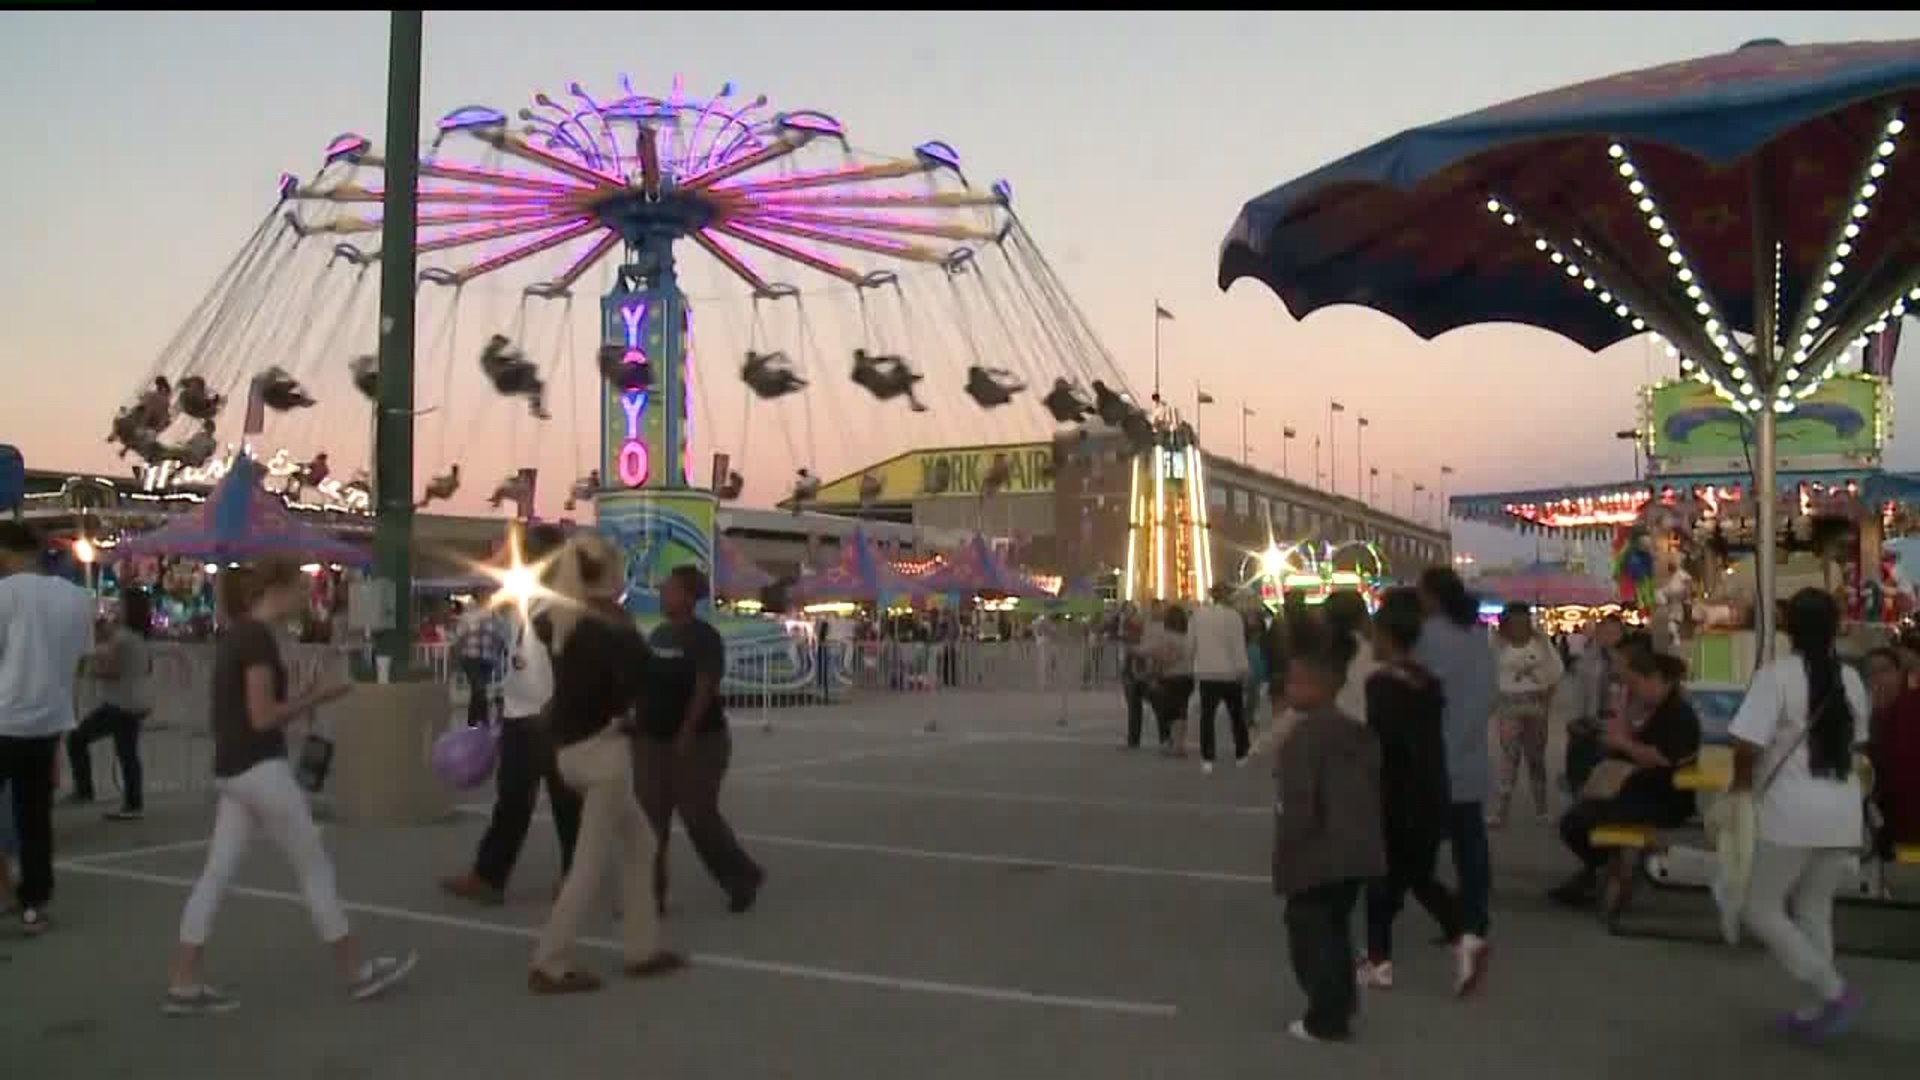 York Fair Name and Date Change in 2020